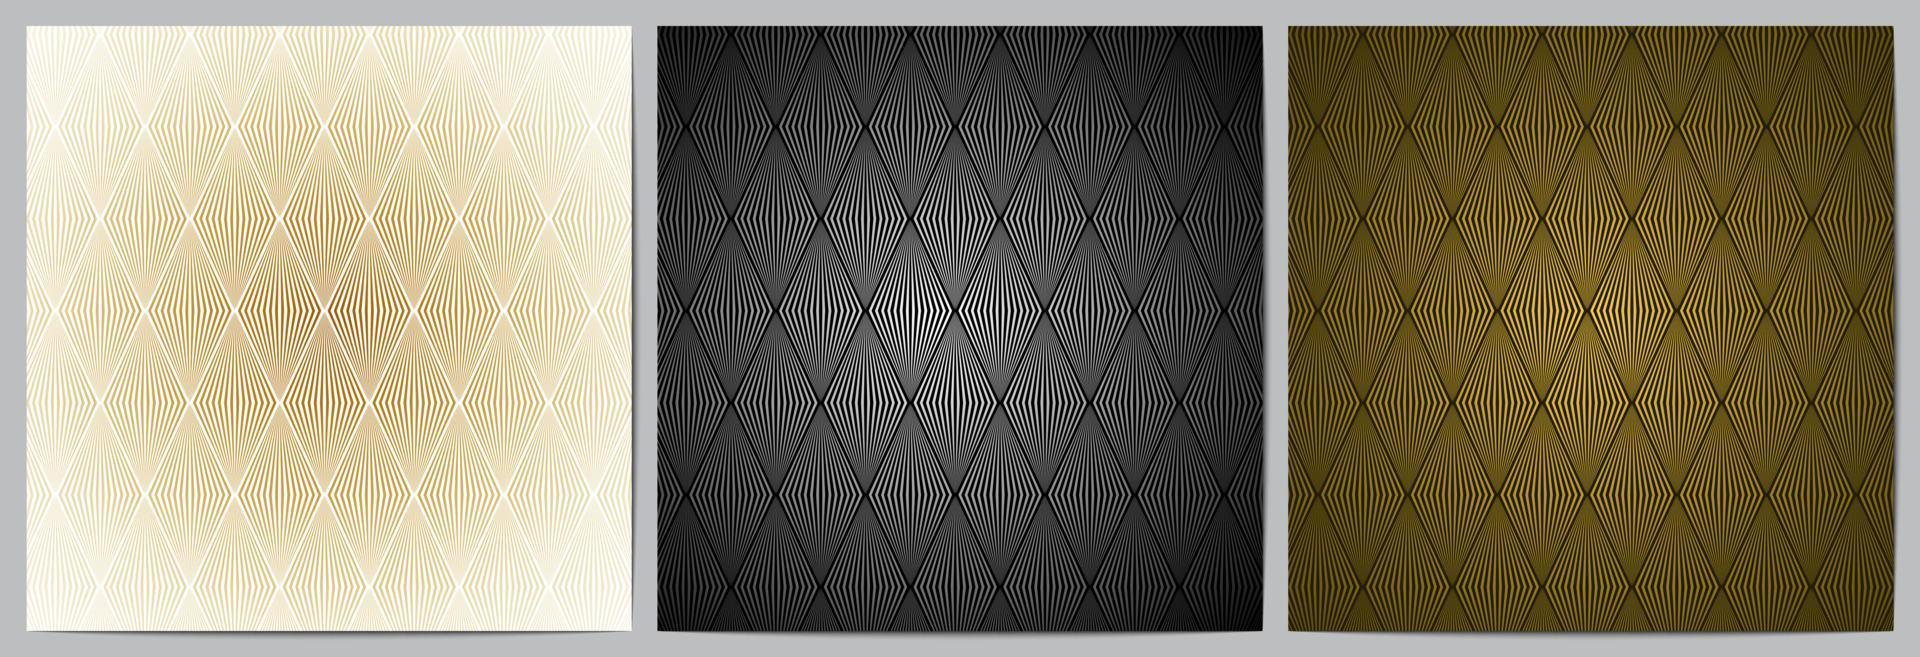 Geometric pattern background with striped wavy lines vector